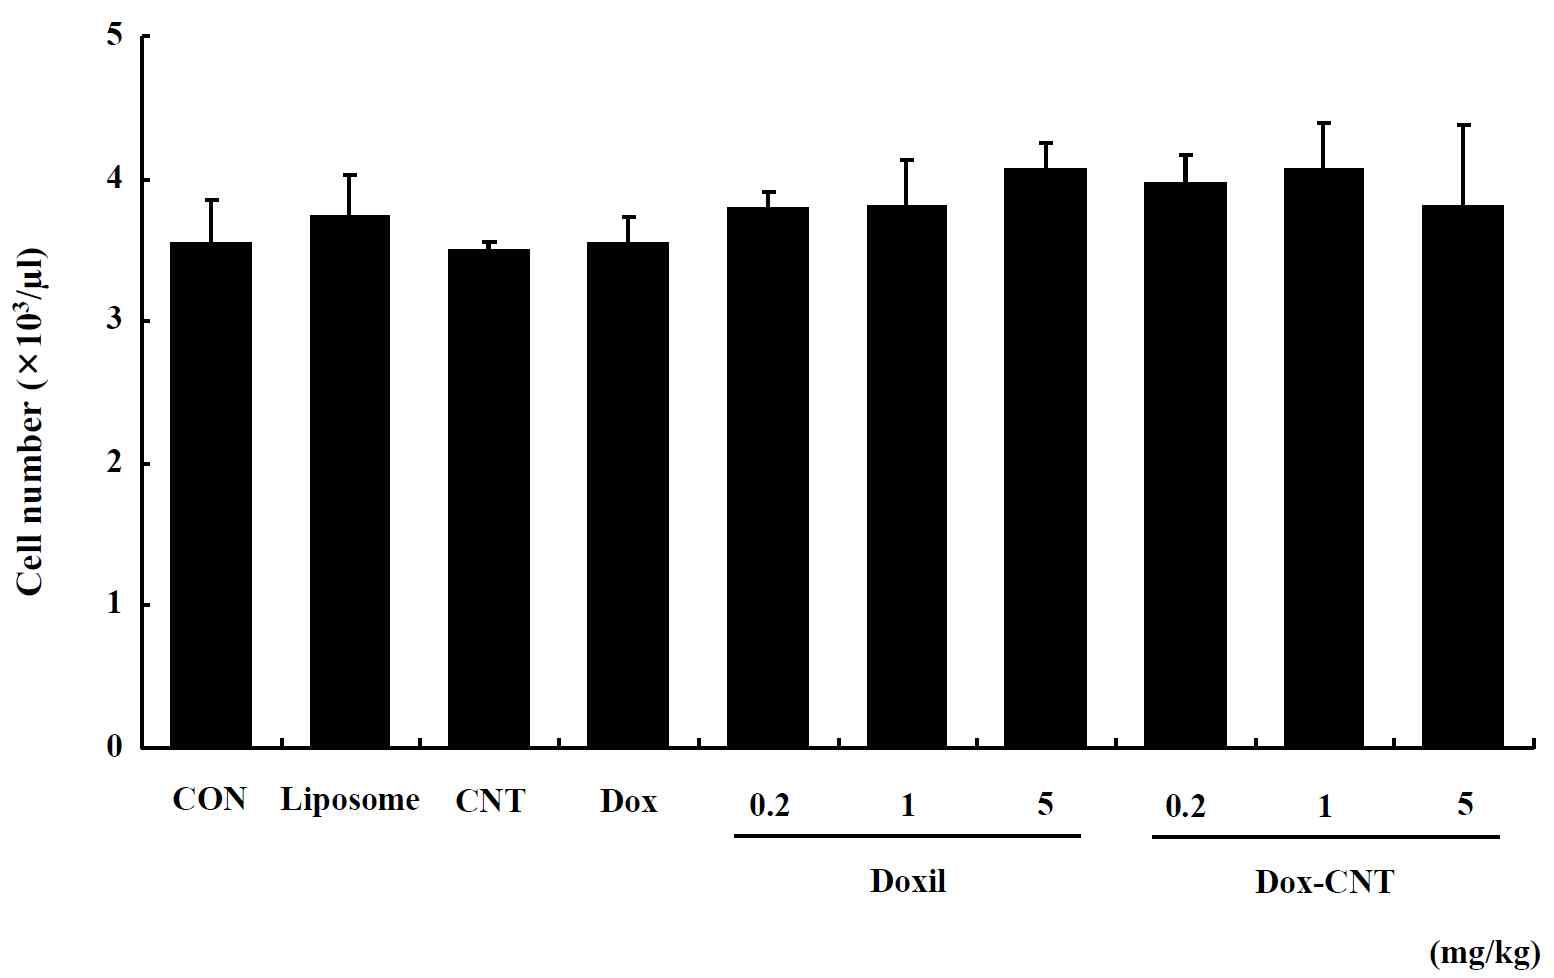 White blood cell counts in single exposed female ICR mice for 14 days. Mice were respectively administered by intravenous injection with liposome, CNT, Dox, Doxil (0.2, 1, 5 mg/kg) and Dox-CNT (0.2, 1, 5 mg/kg). The results are presented as mean ± SE (n = 10). * p < 0.05, significantly different from the control.